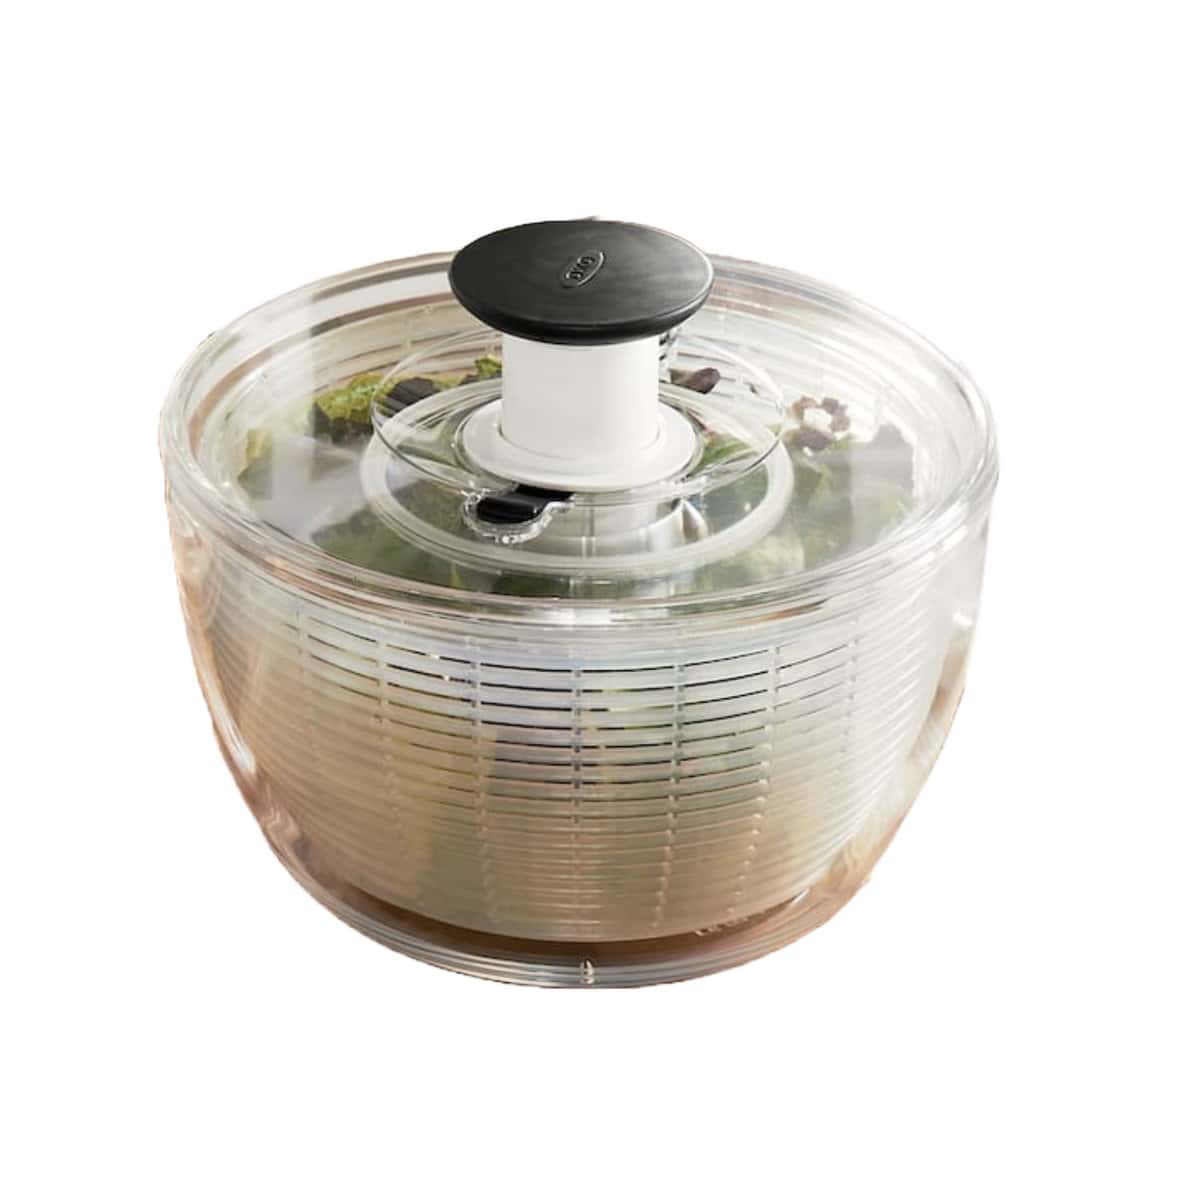 salad spinner on a white background